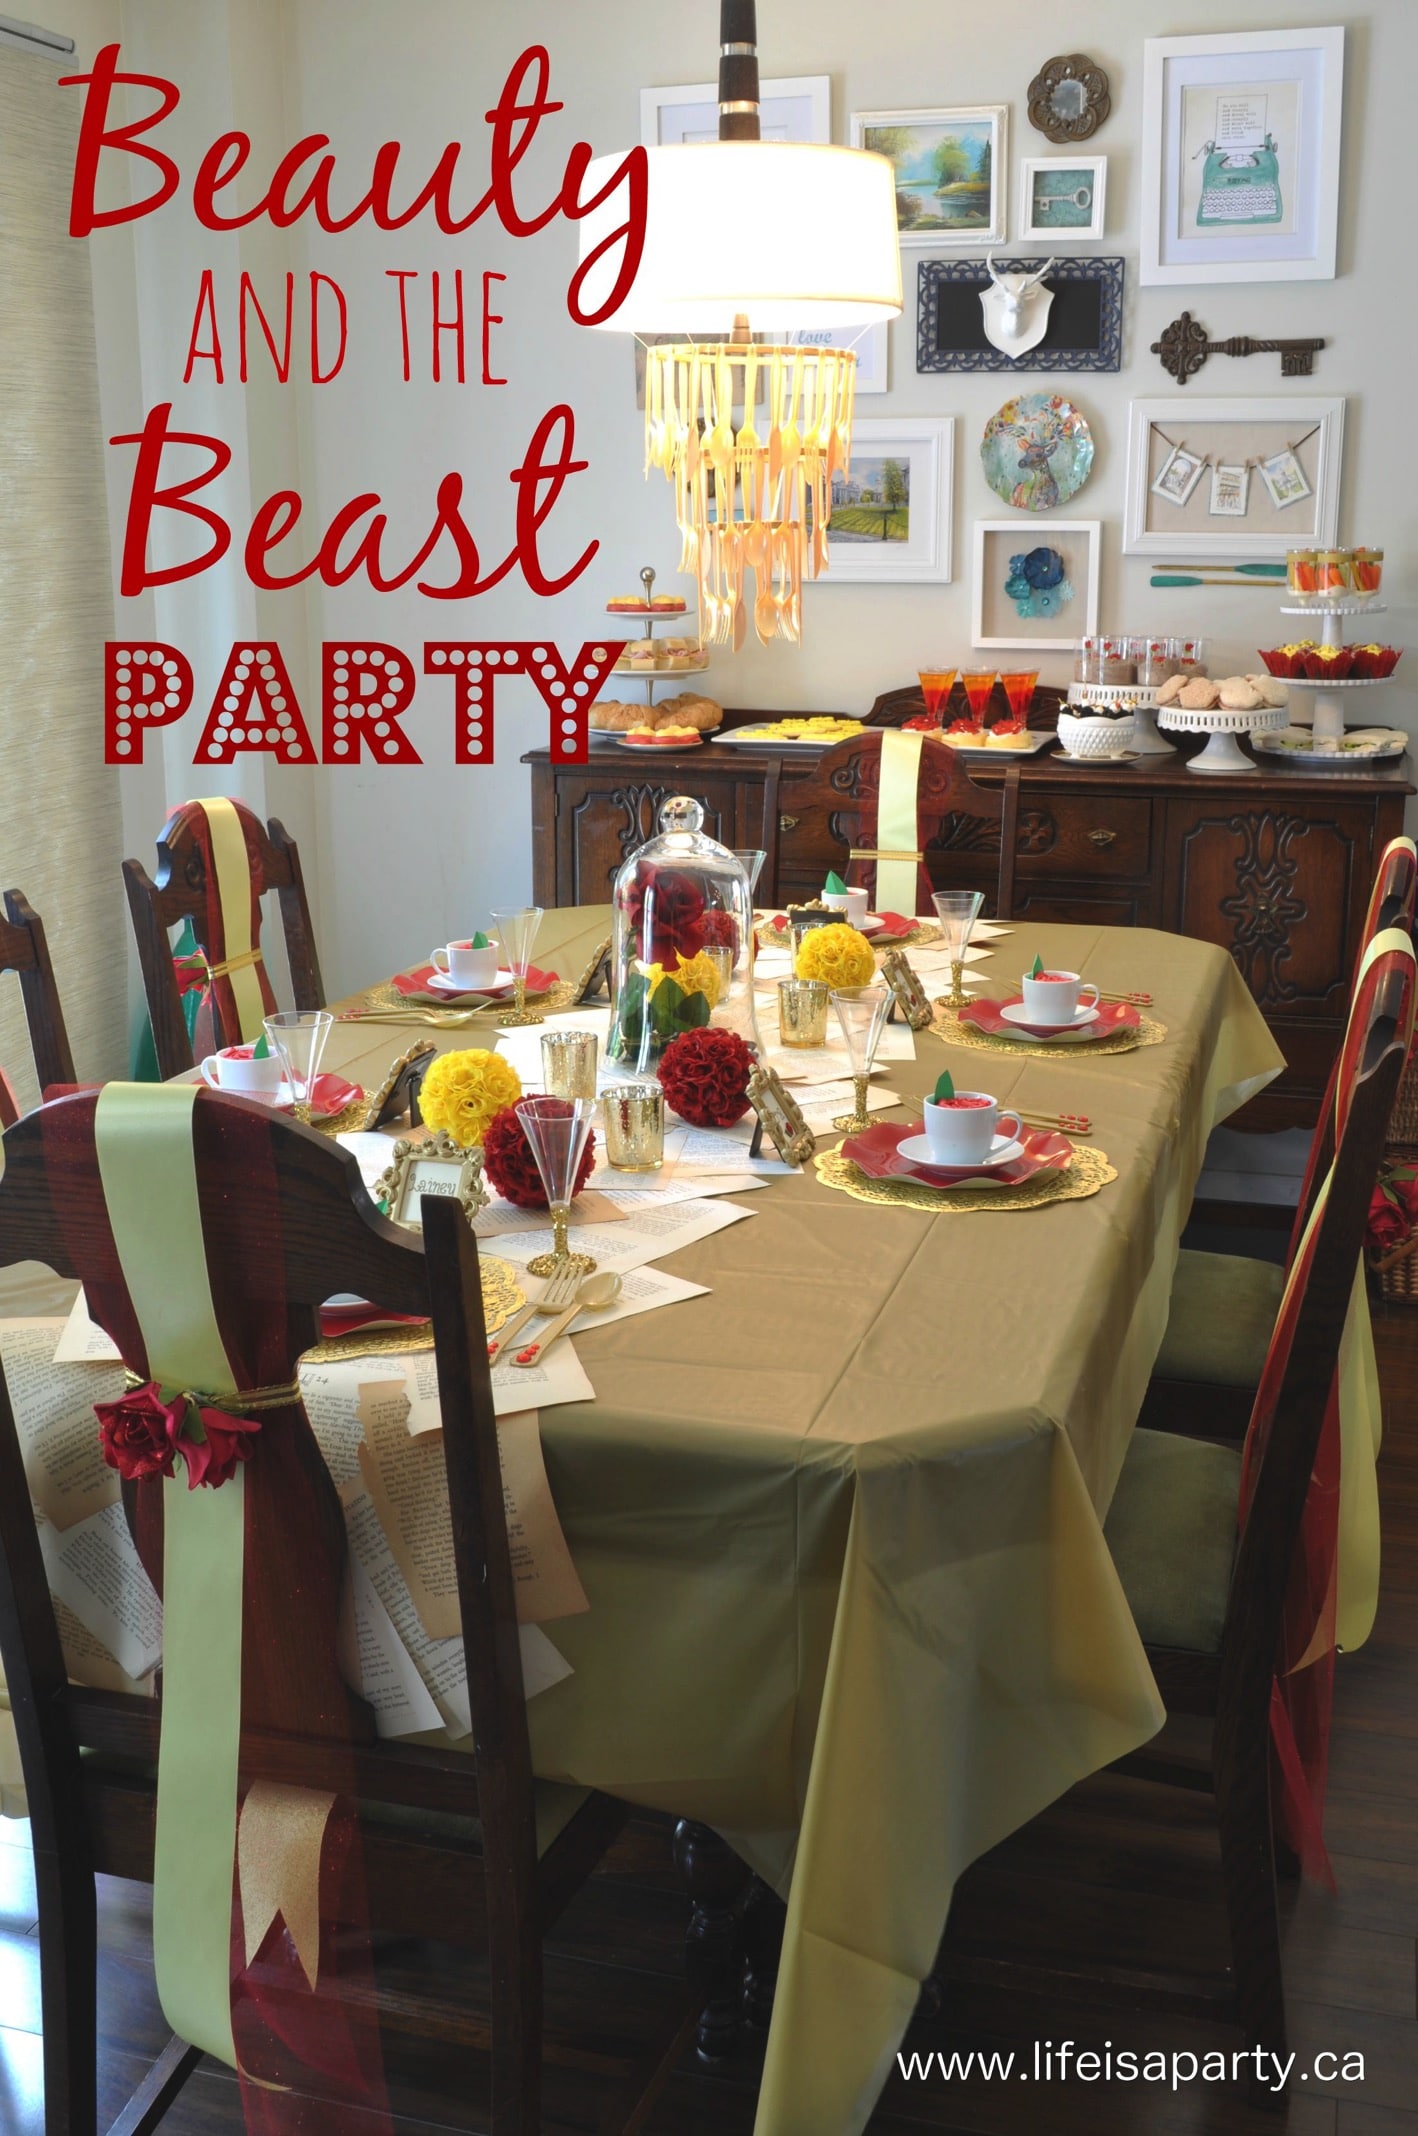 Beauty and the Beast party ideas